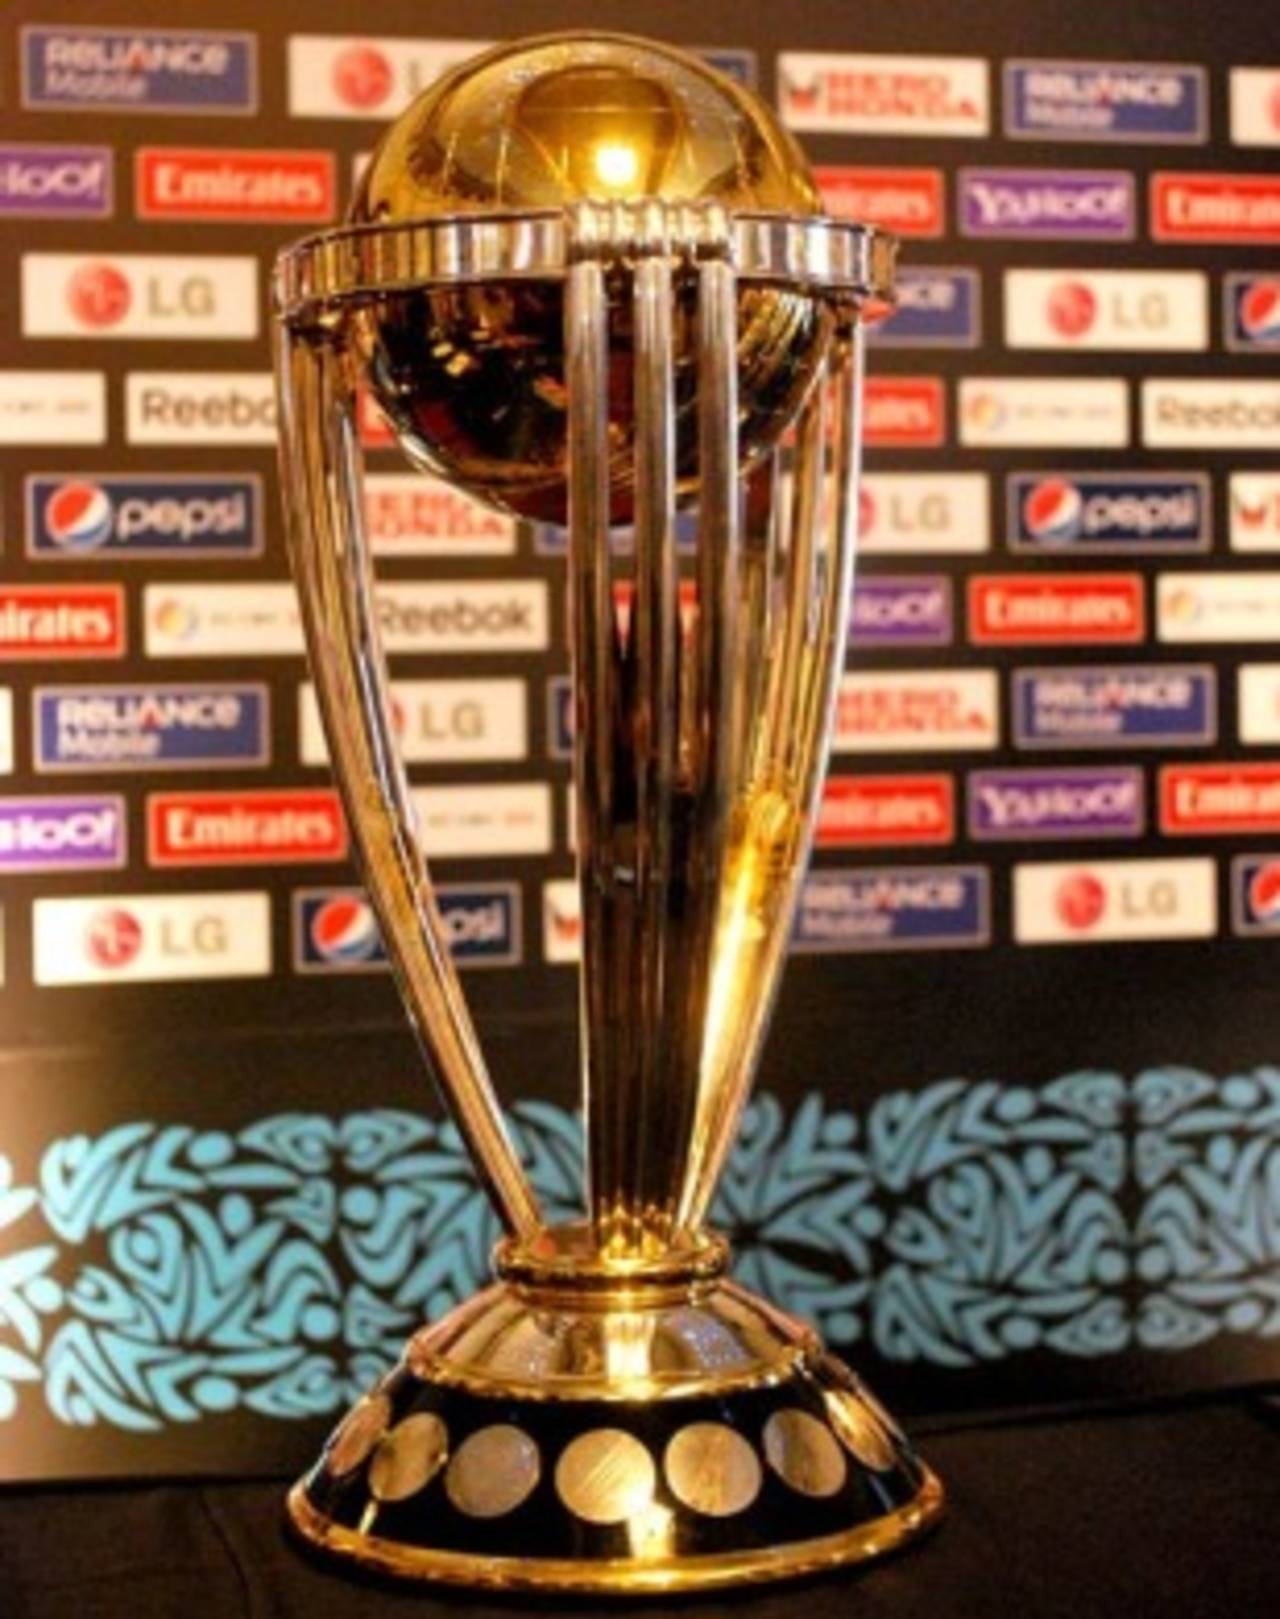 The 2011 World Cup trophy is displayed, Colombo, April 2, 2010